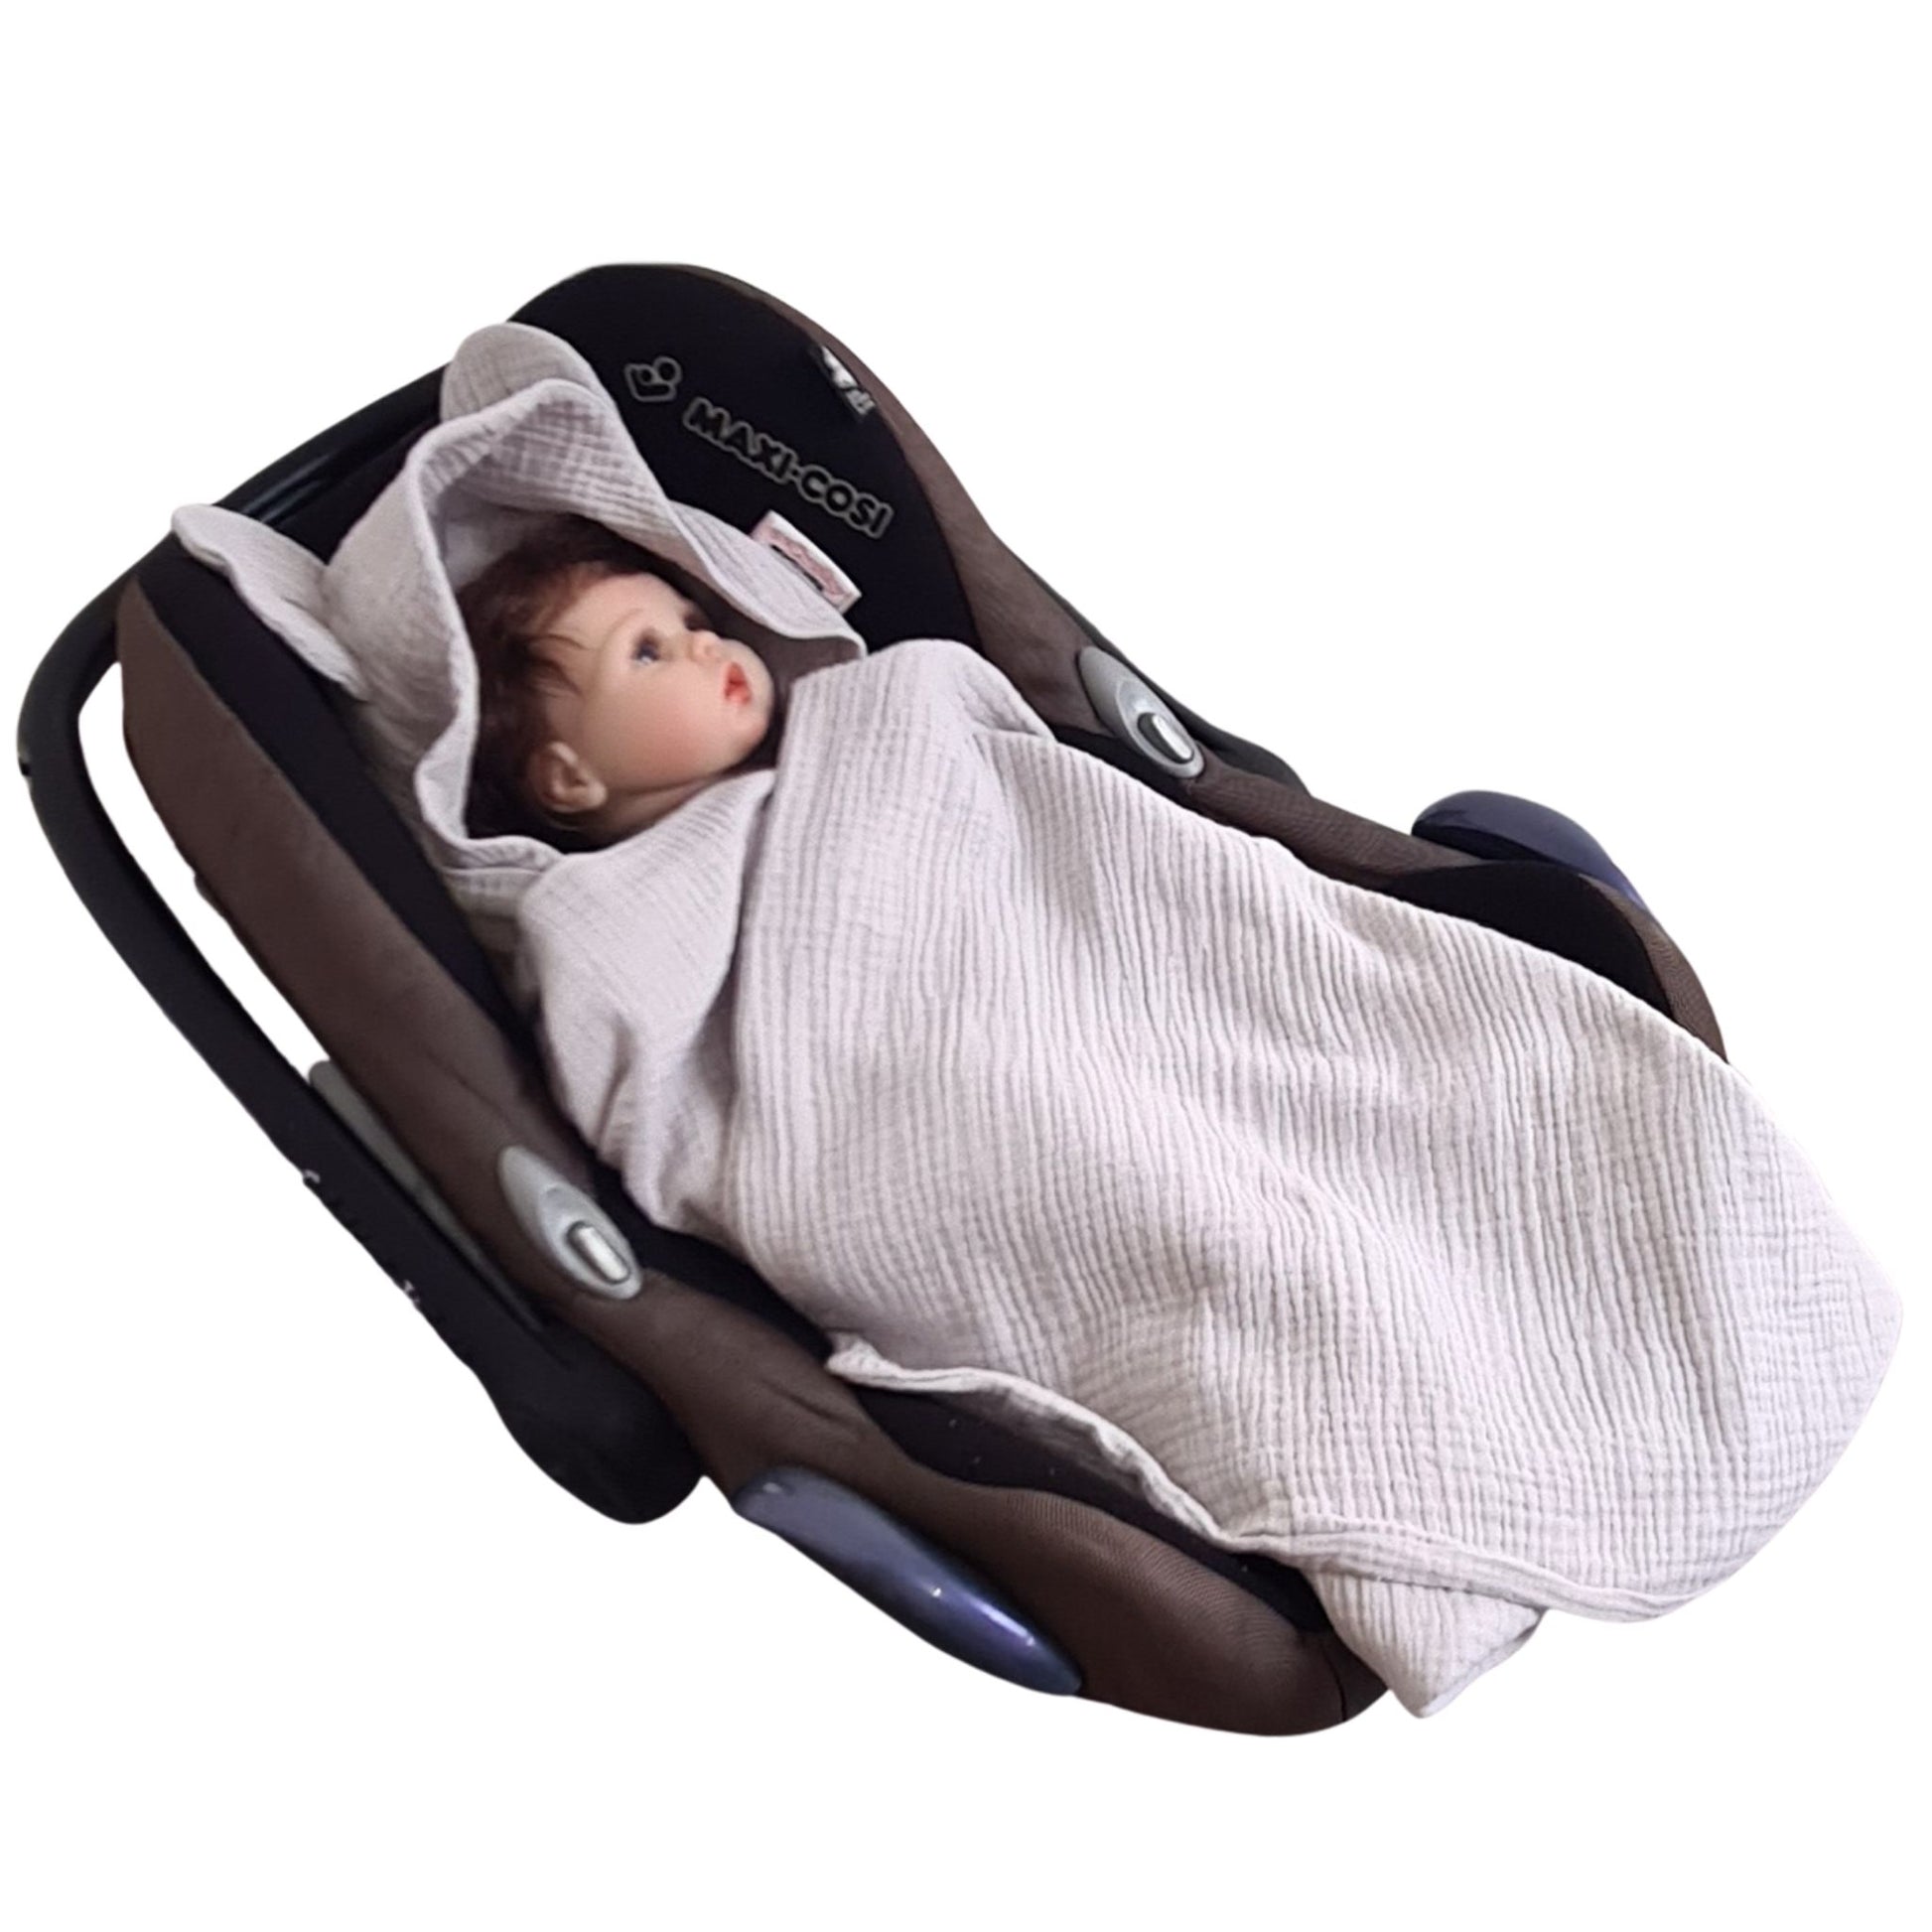 soft grey cotton blanket with hood and holes for car seats belts. summer light blanket for newborns